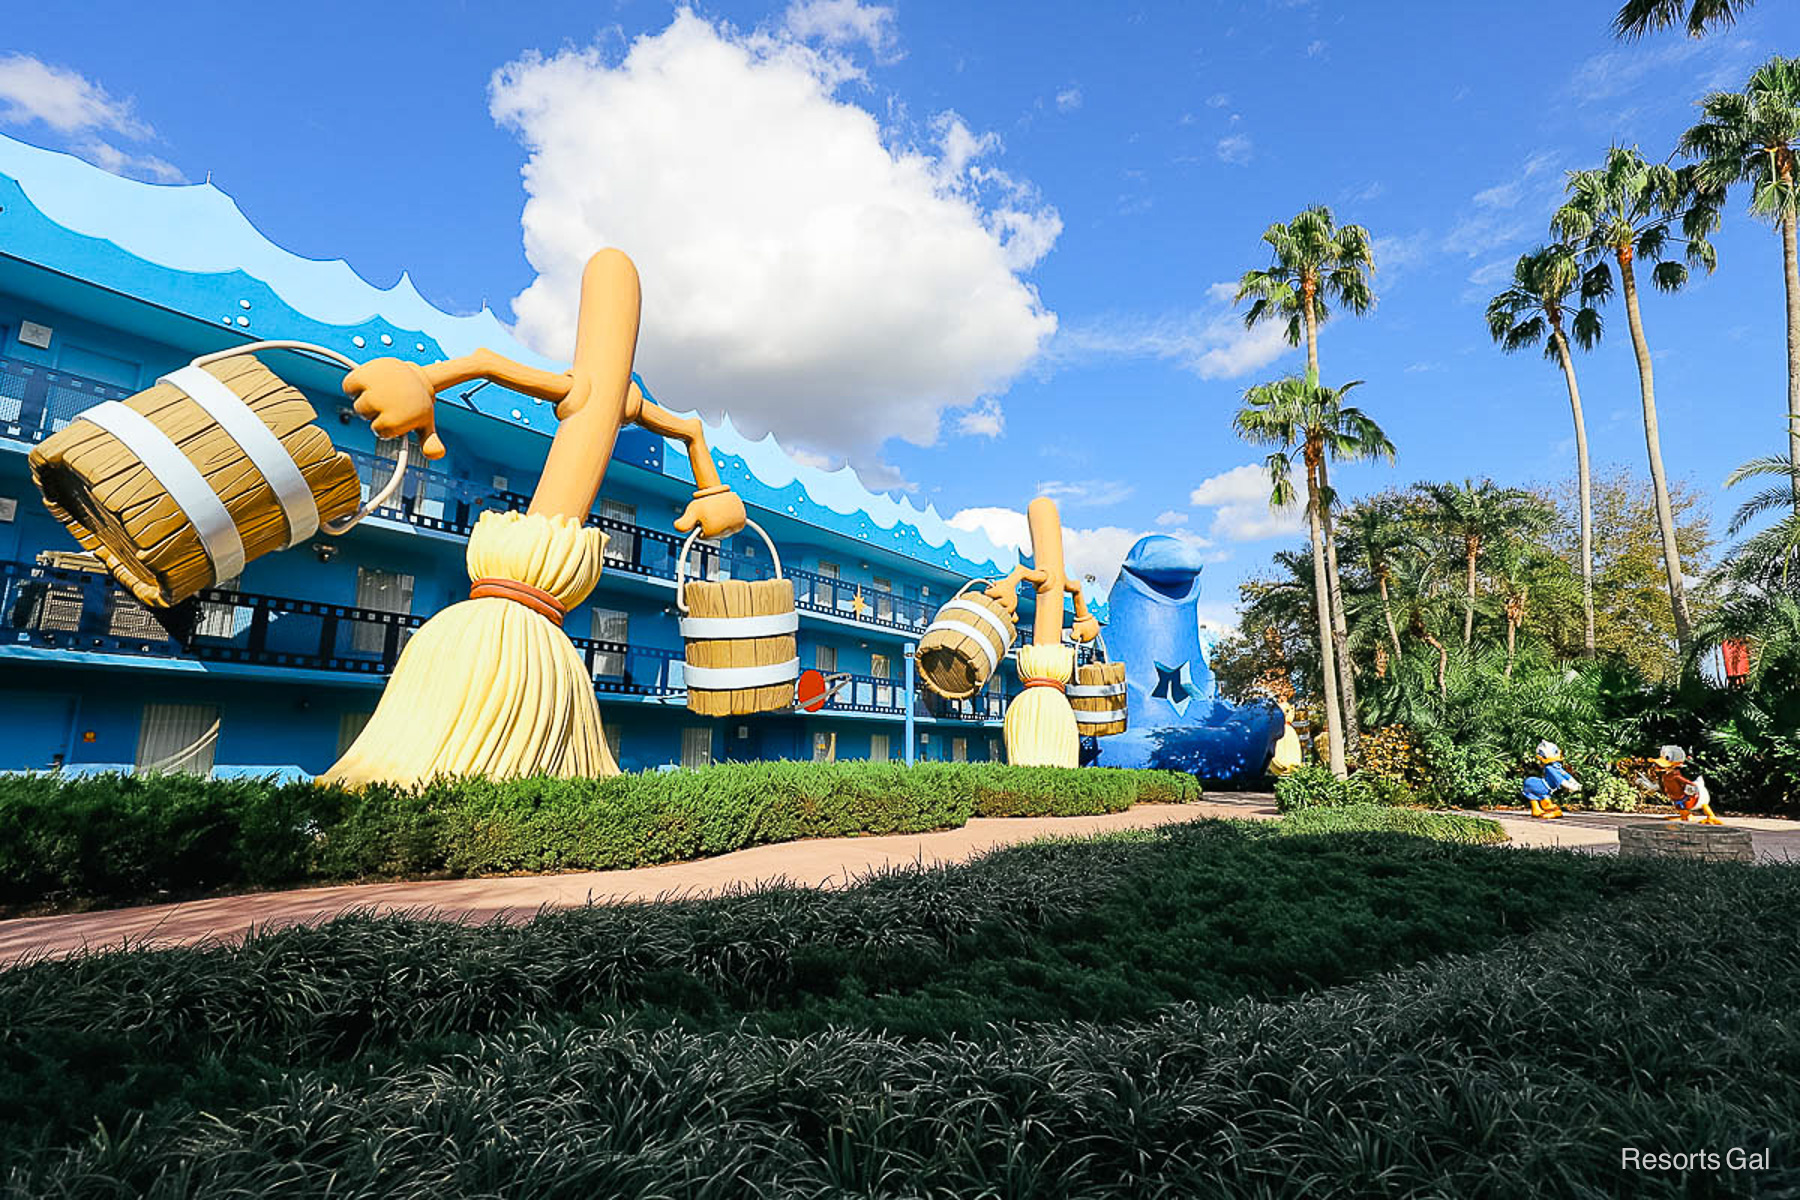 the Fantasia section of All-Star Movies with large mops carrying buckets of water 